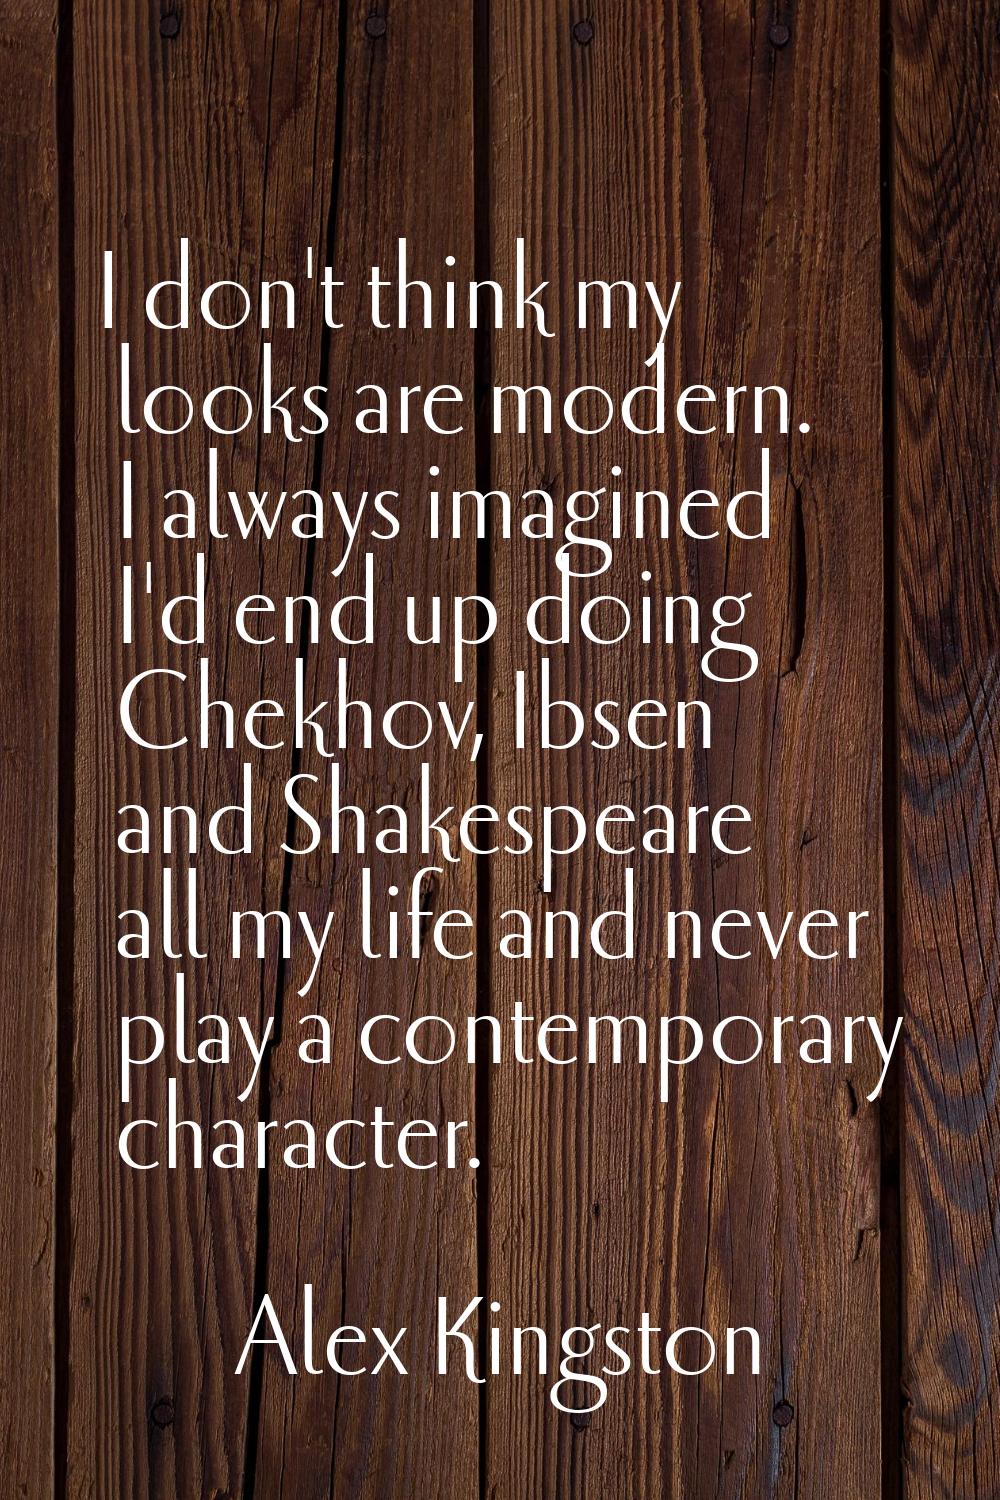 I don't think my looks are modern. I always imagined I'd end up doing Chekhov, Ibsen and Shakespear